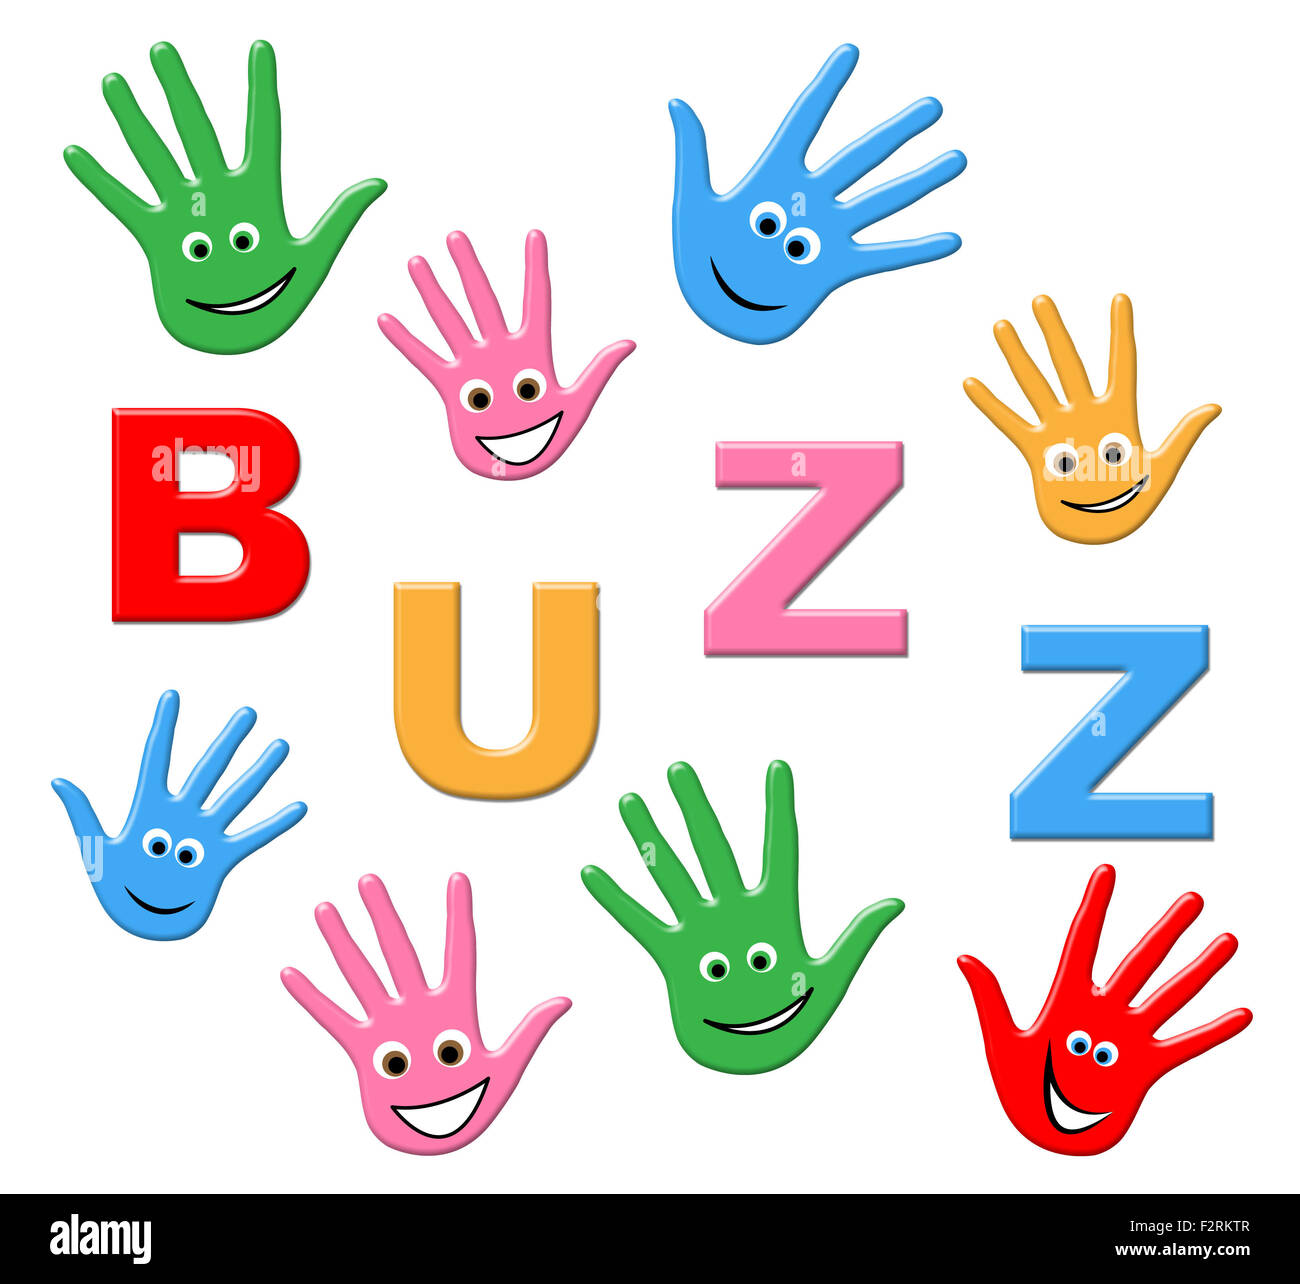 Buzz Kids Indicating Public Relations And Popularity Stock Photo